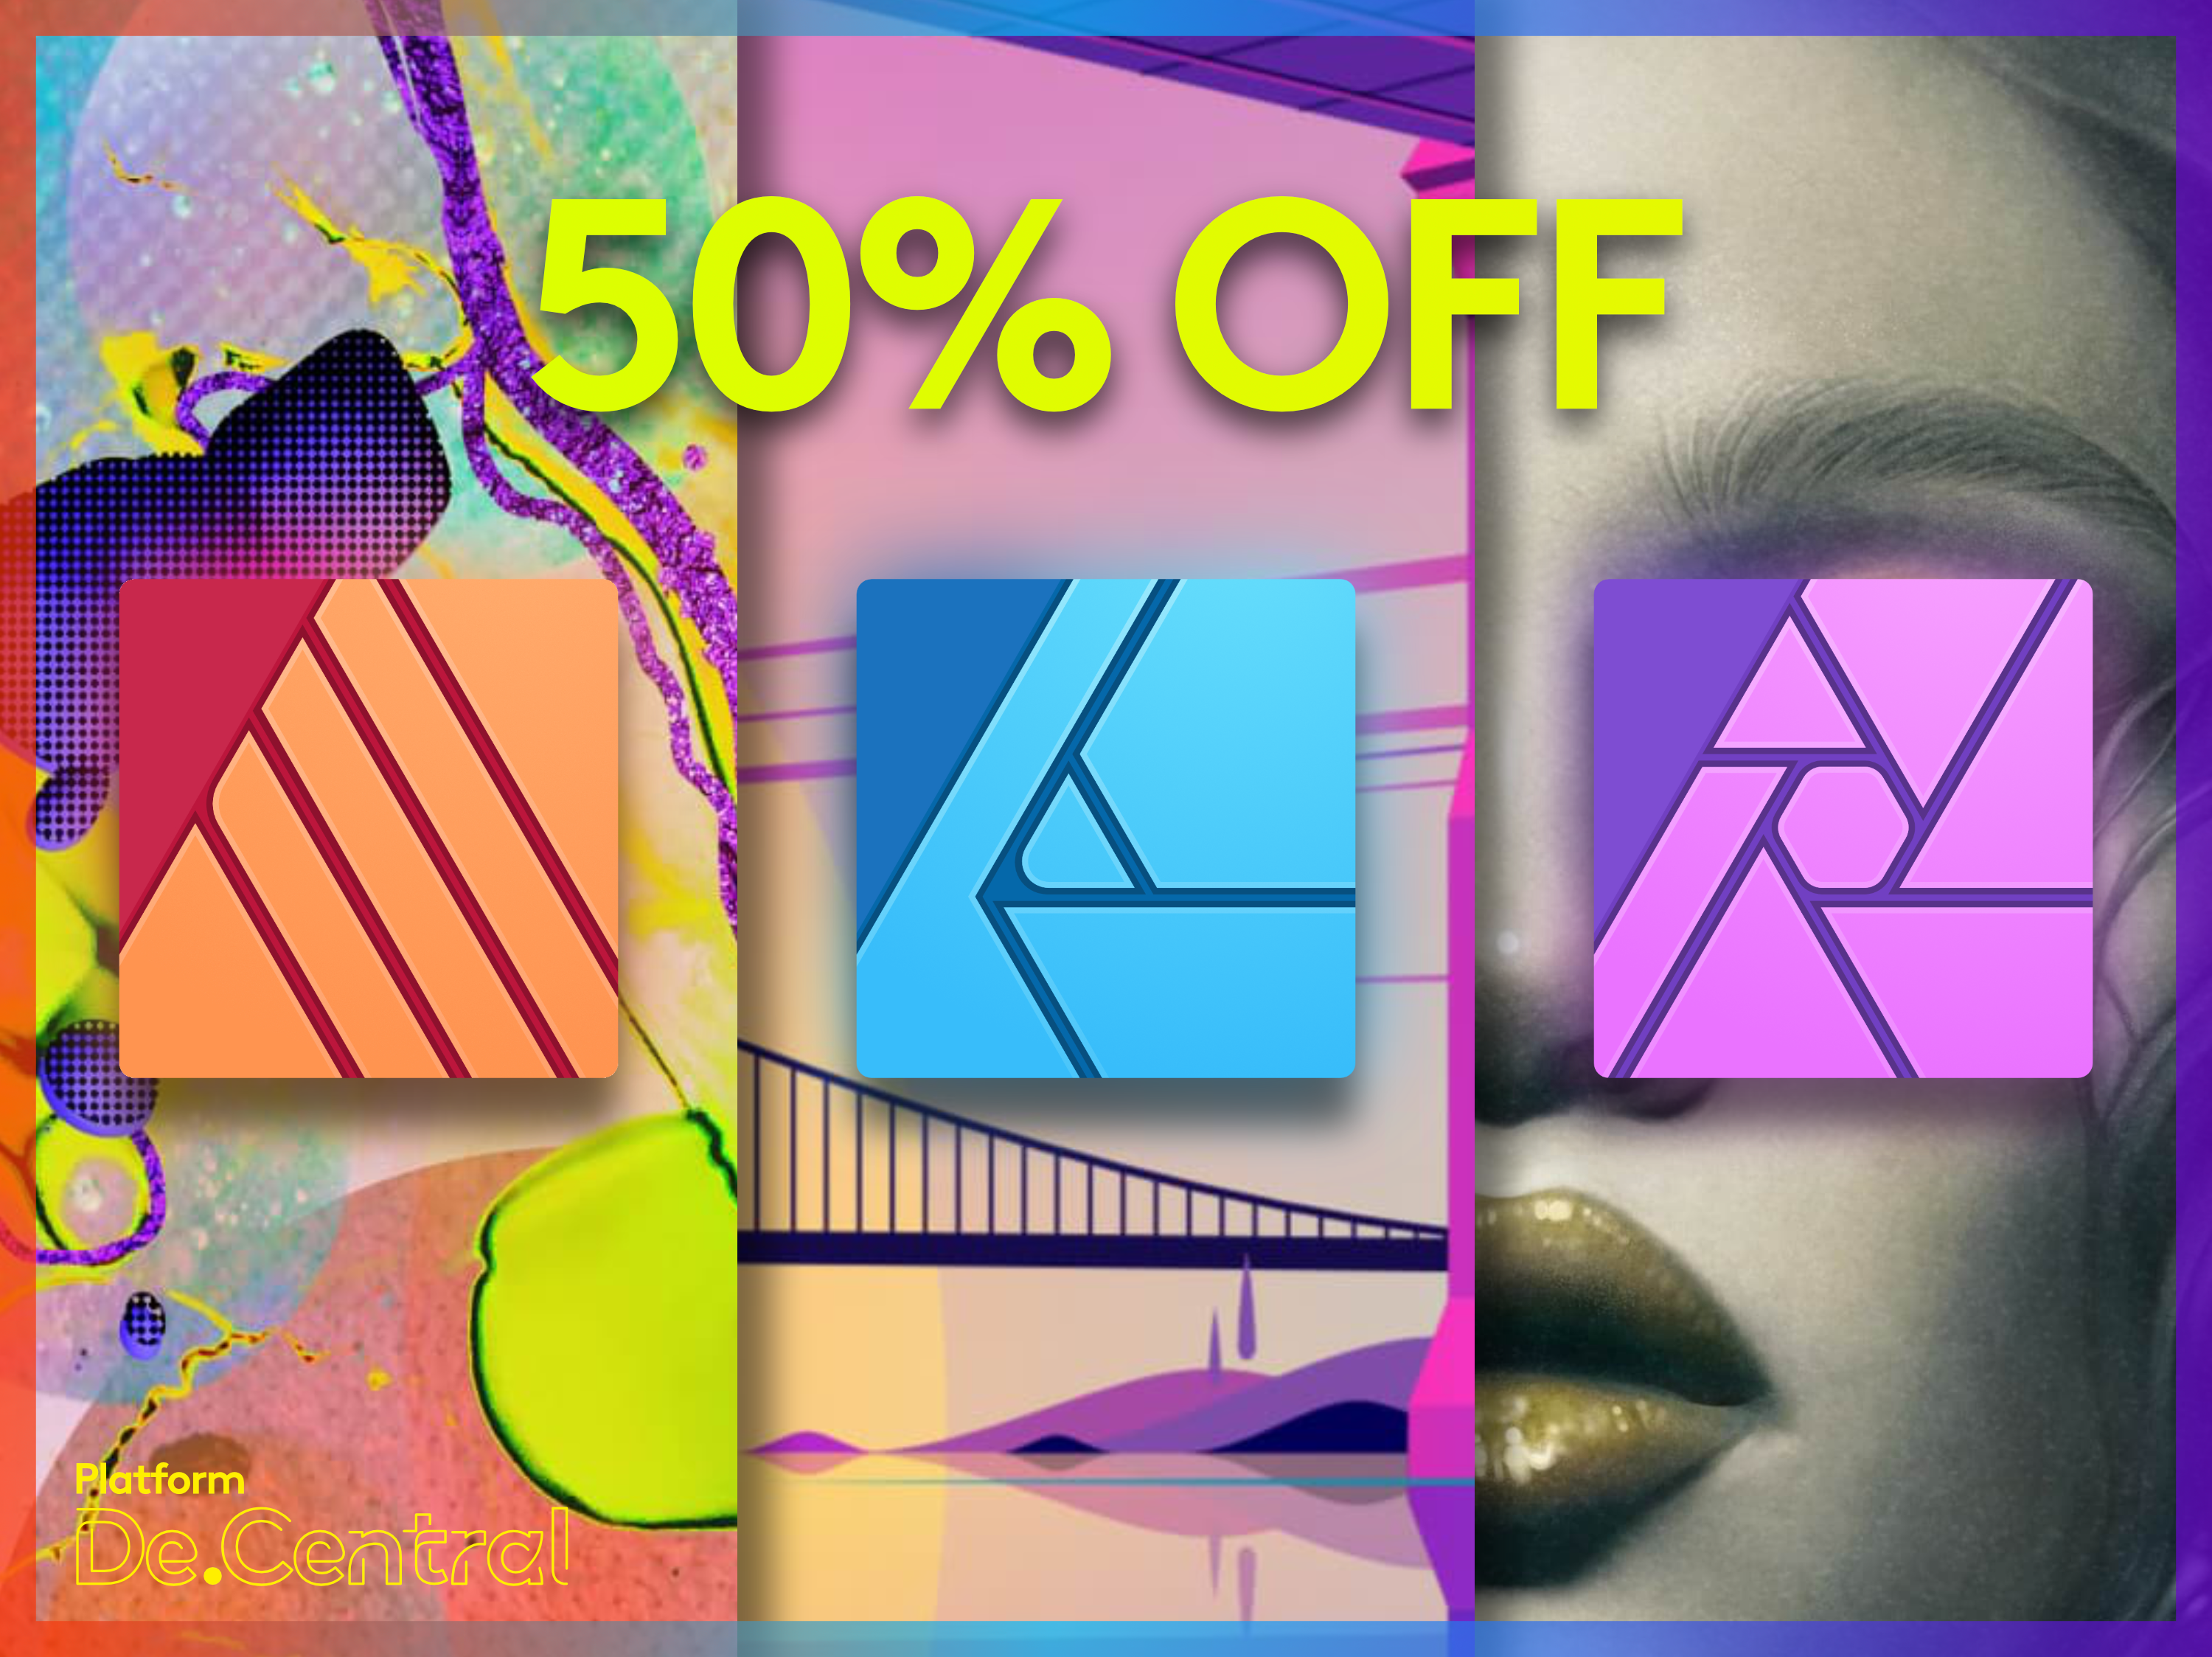 Affinity is offering 90-days free on top of a 50% discount on its Apps